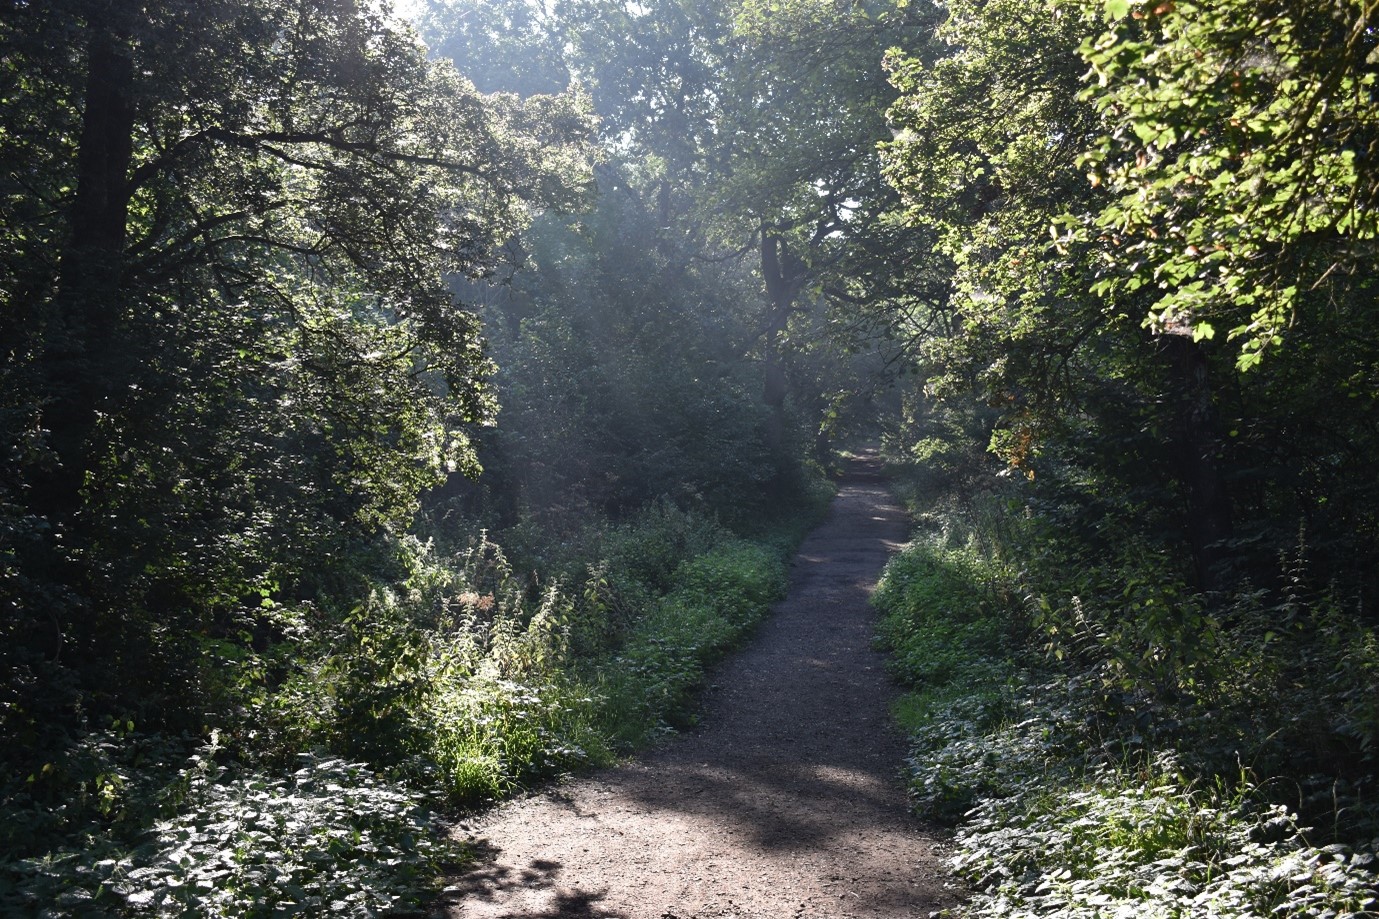 Howe Park Wood in Milton Keynes,it's ancient woodland, thought to be almost 1,000 years old